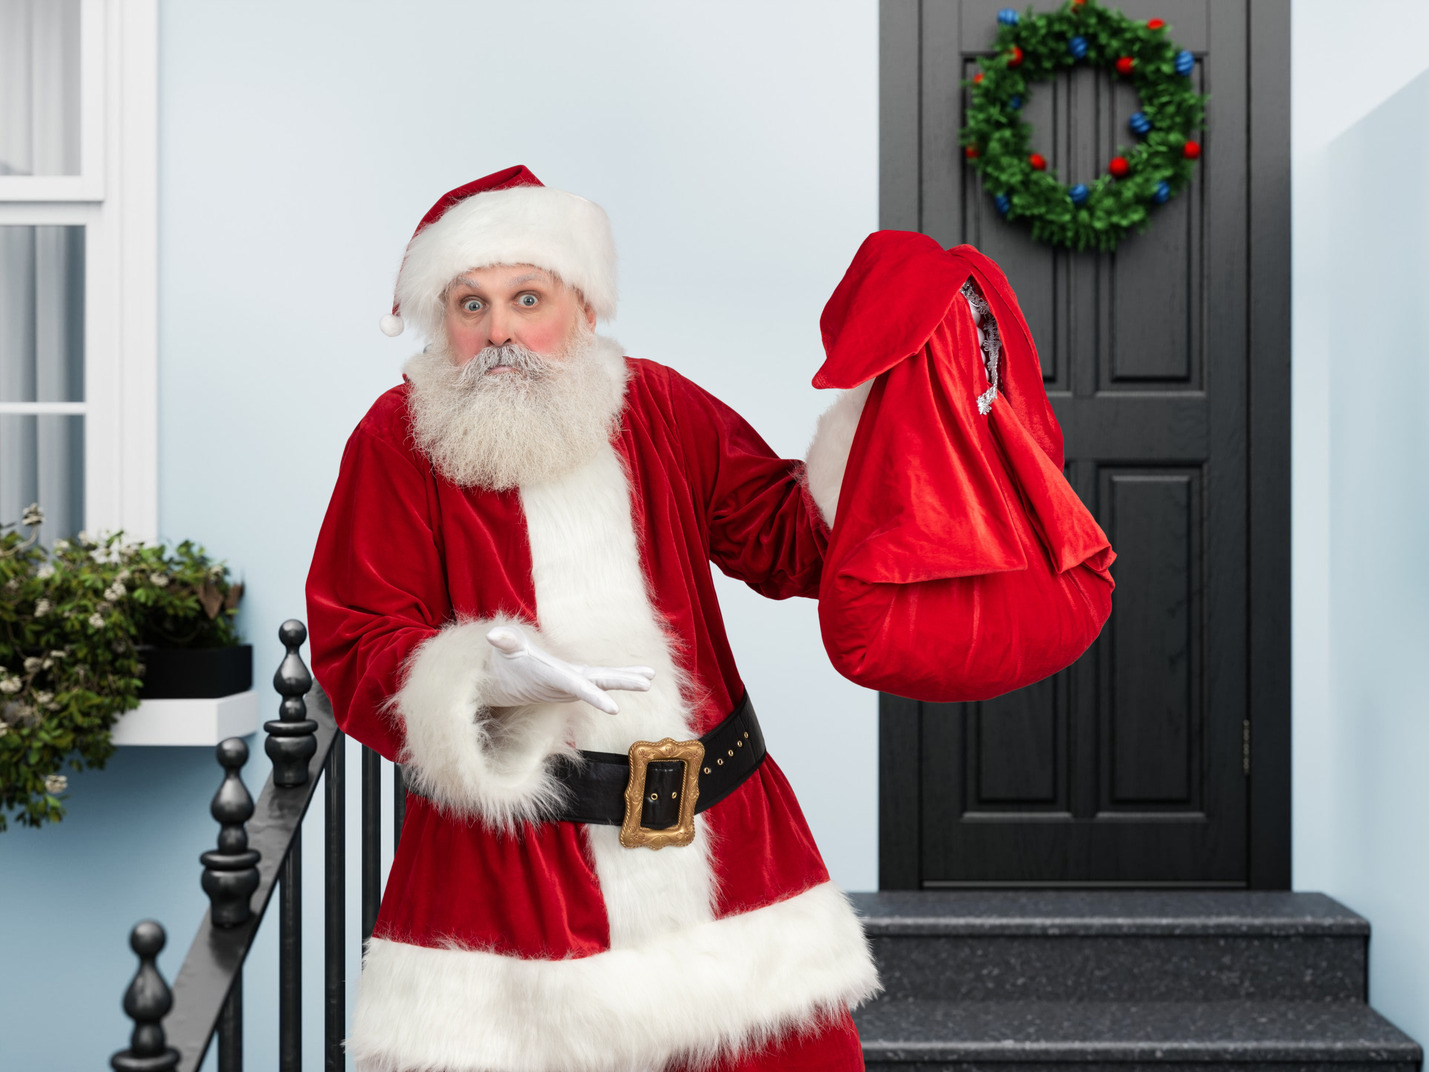 Santa claus is embarassed with how many gifts this house has ordered